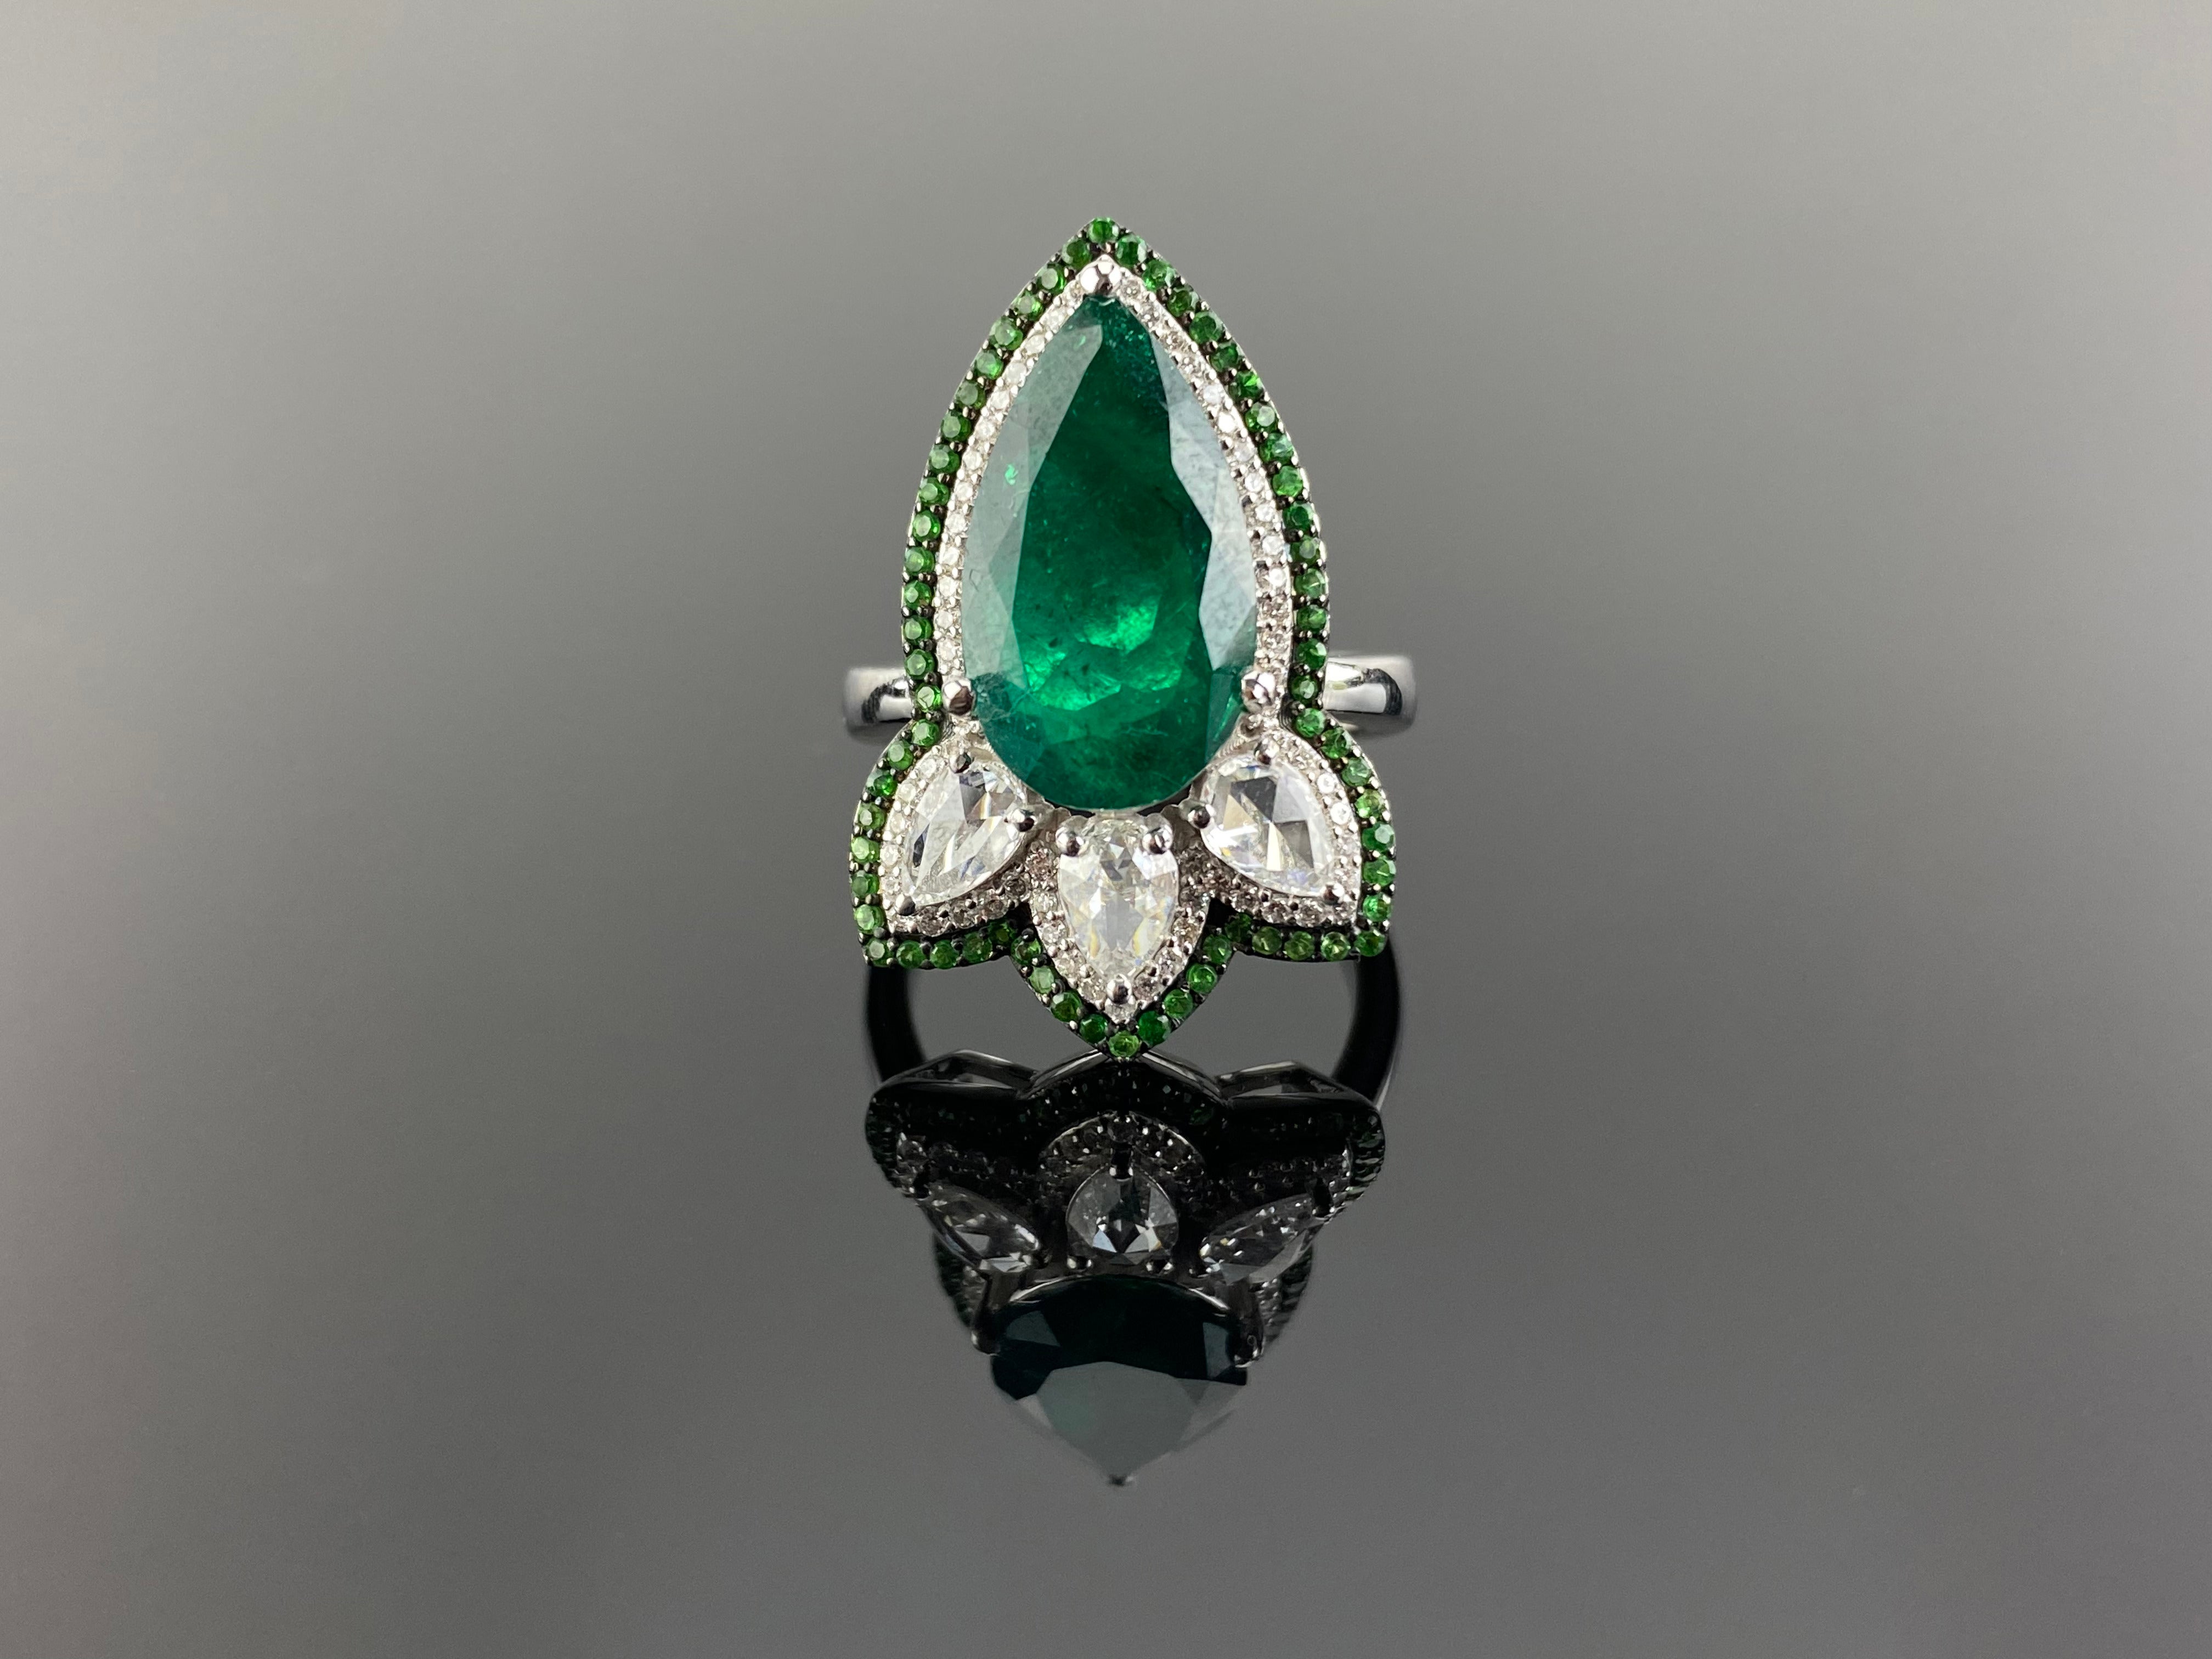 A very uniquely designed certified natural 4.08 carat Zambian Emerald pear shaped, with 0.61 carats of pear shaped White Diamonds, surrounded with Diamonds and Tsavorites - giving it an art-deco look. The center stone is an ideal vivid green color,